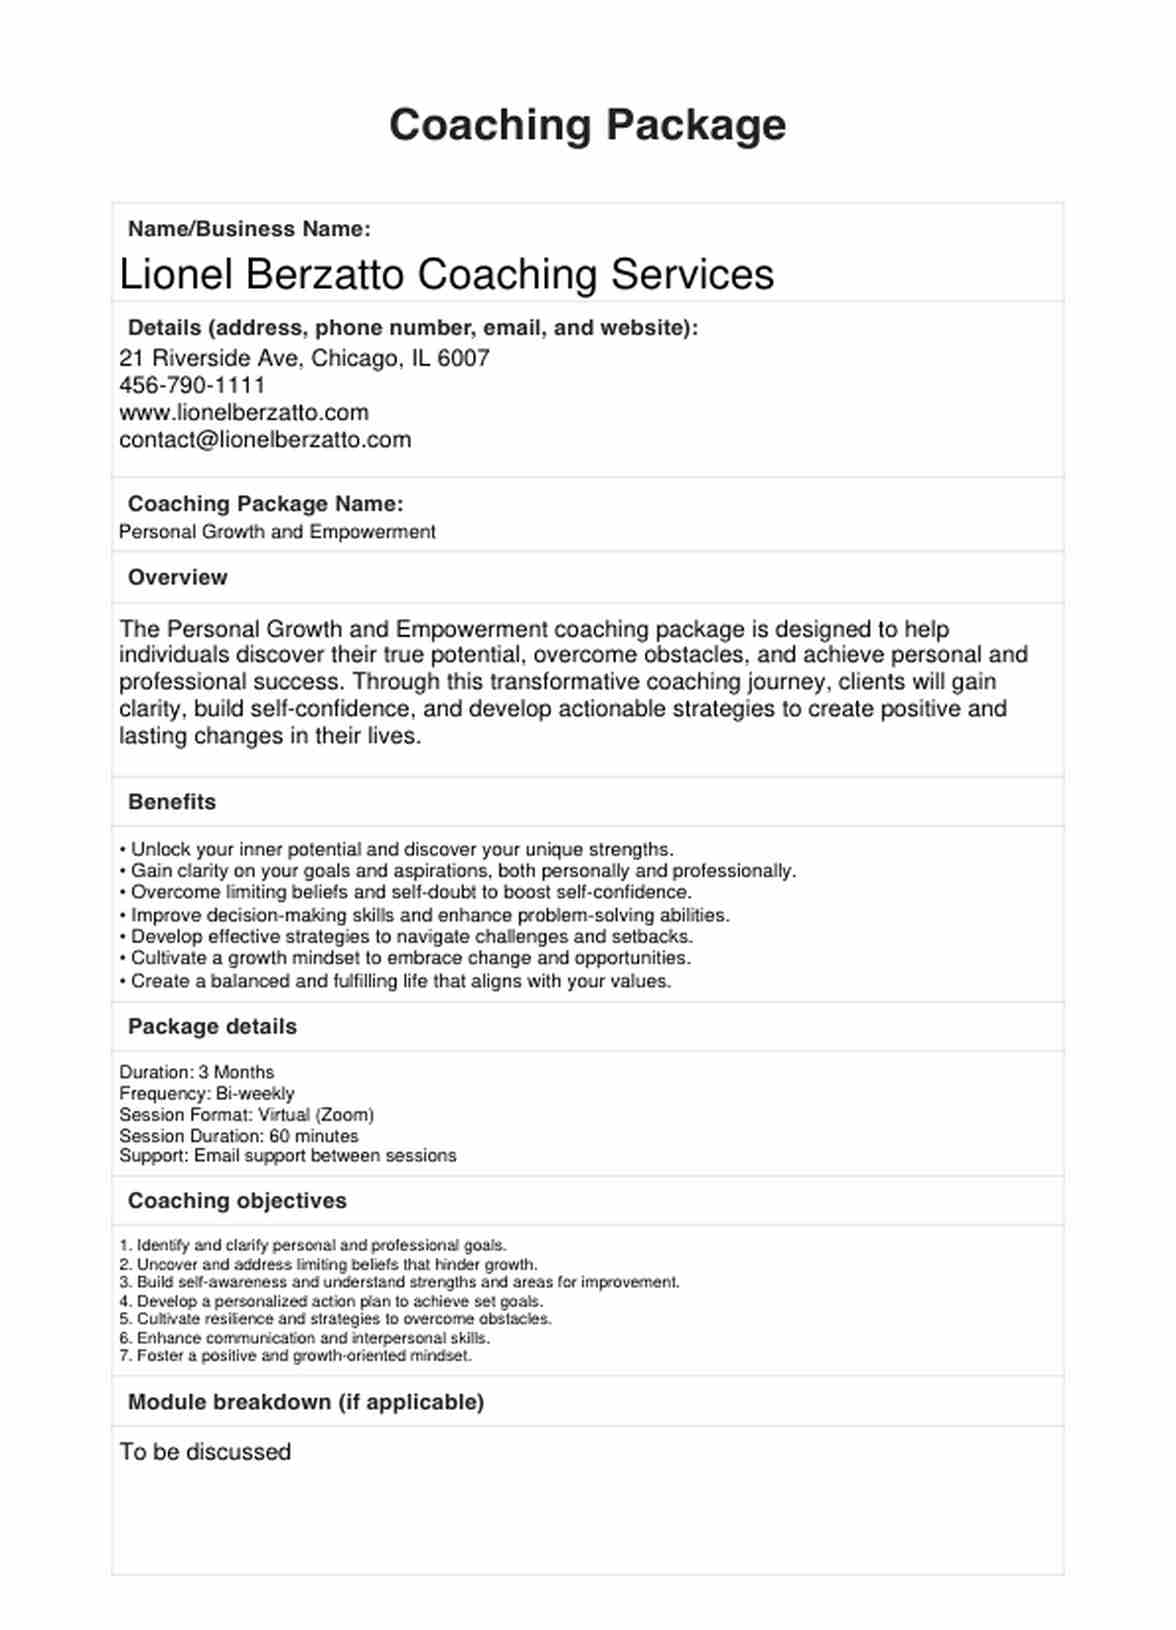 Coaching Package Template PDF Example